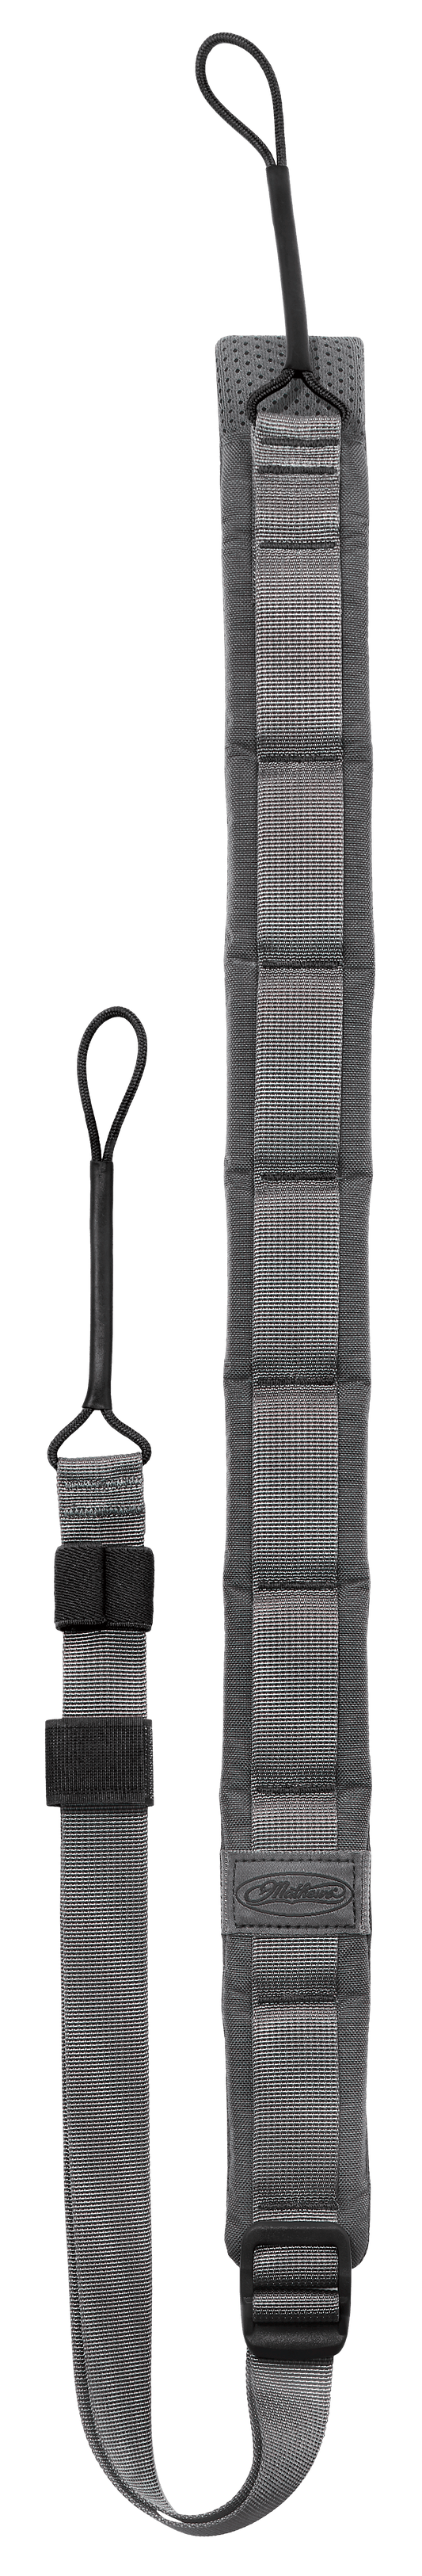 MATHEWS Bow Sling - Silent Connect system